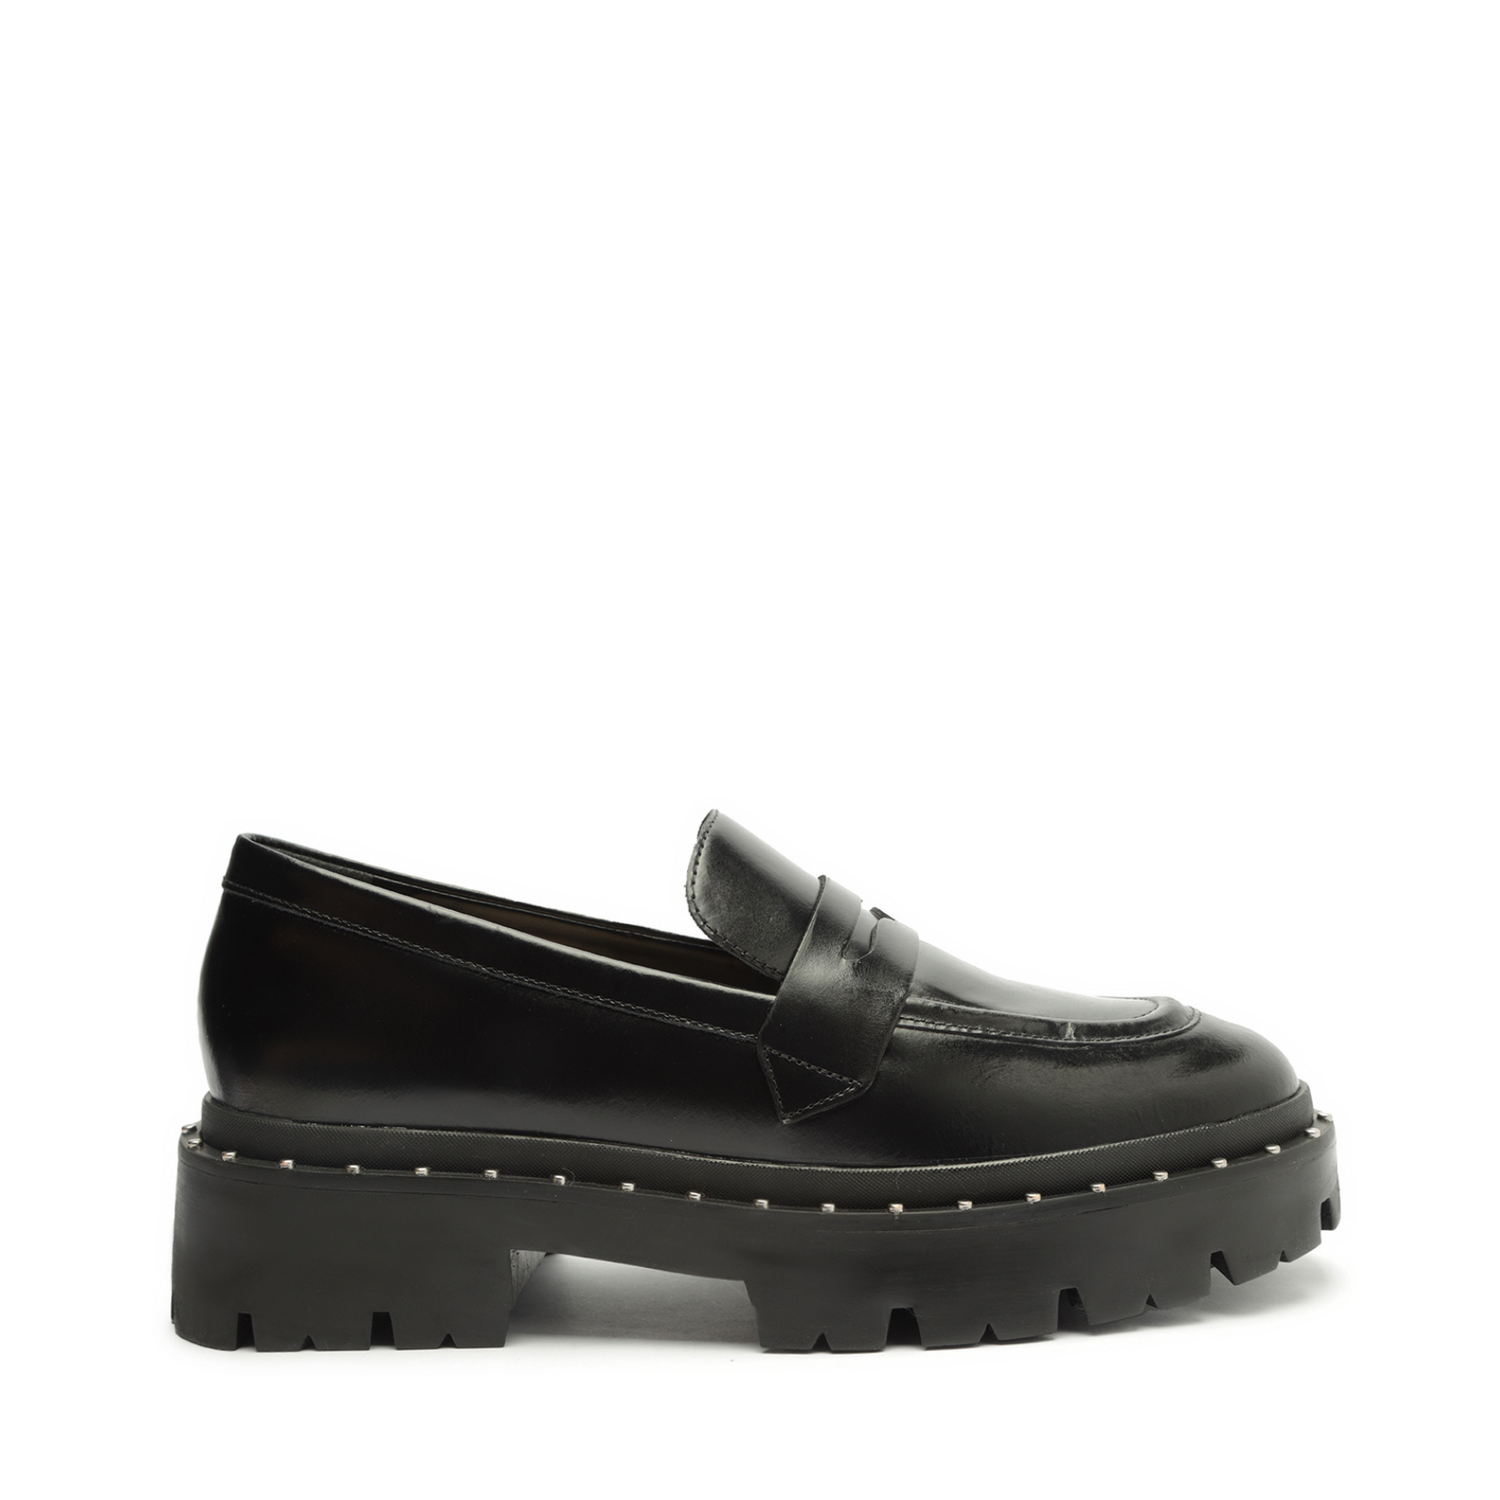 Christie Studs Leather Flat Flats Fall 23 5 Black Leather - Schutz Shoes